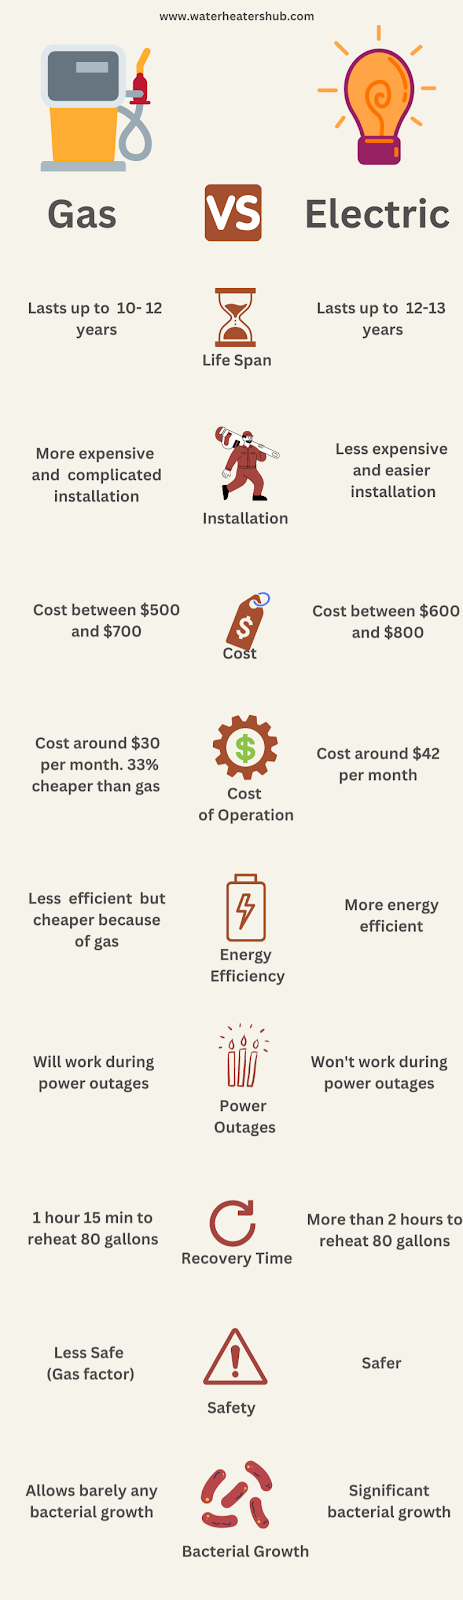 Electric vs. Gas Water Heaters